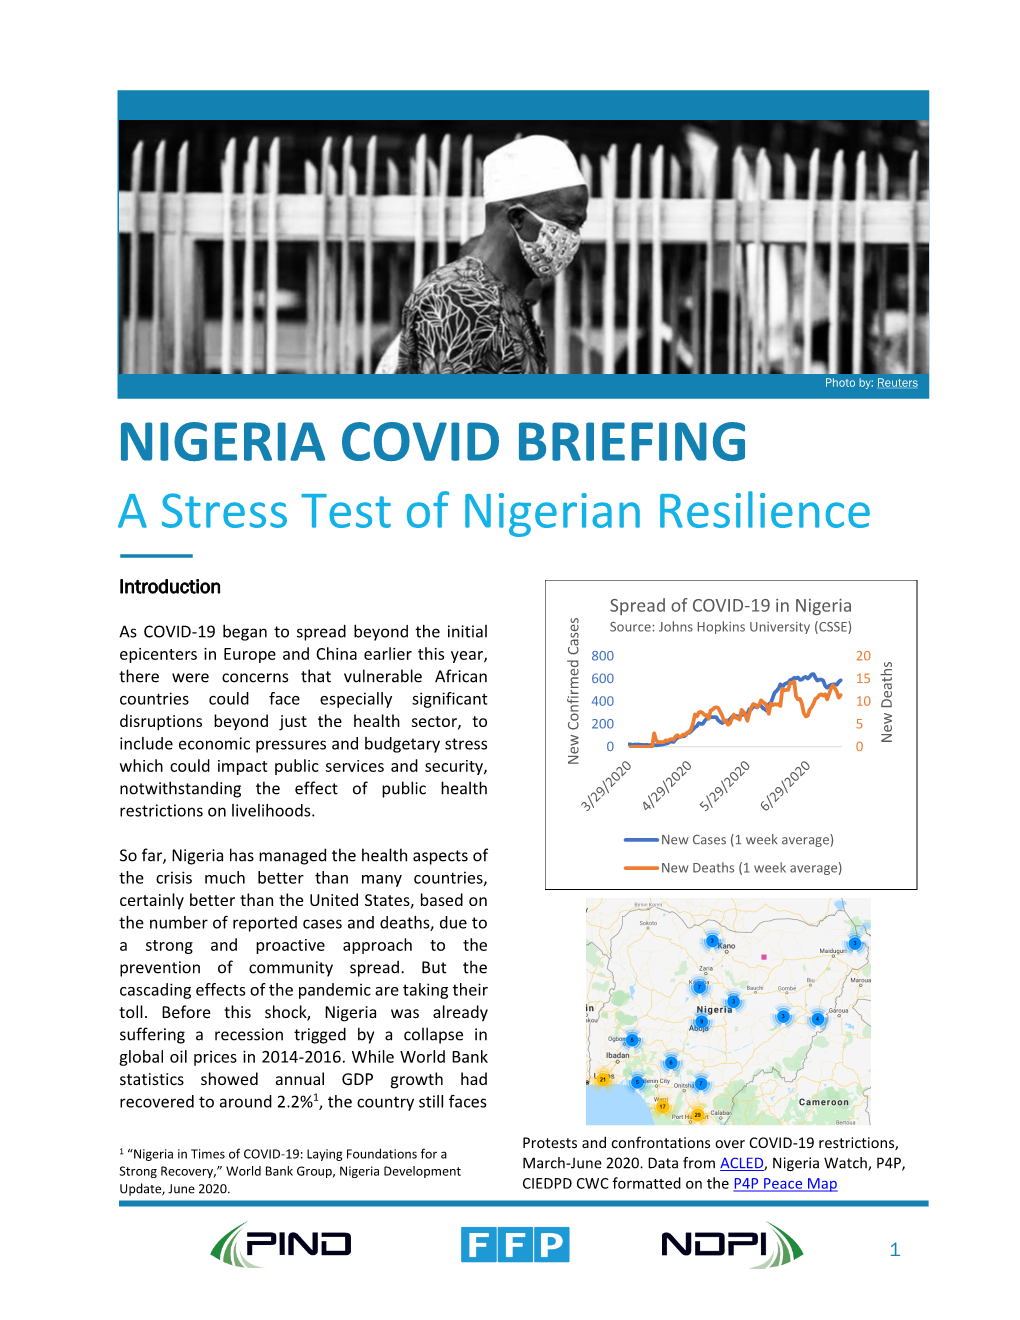 NIGERIA COVID BRIEFING a Stress Test of Nigerian Resilience